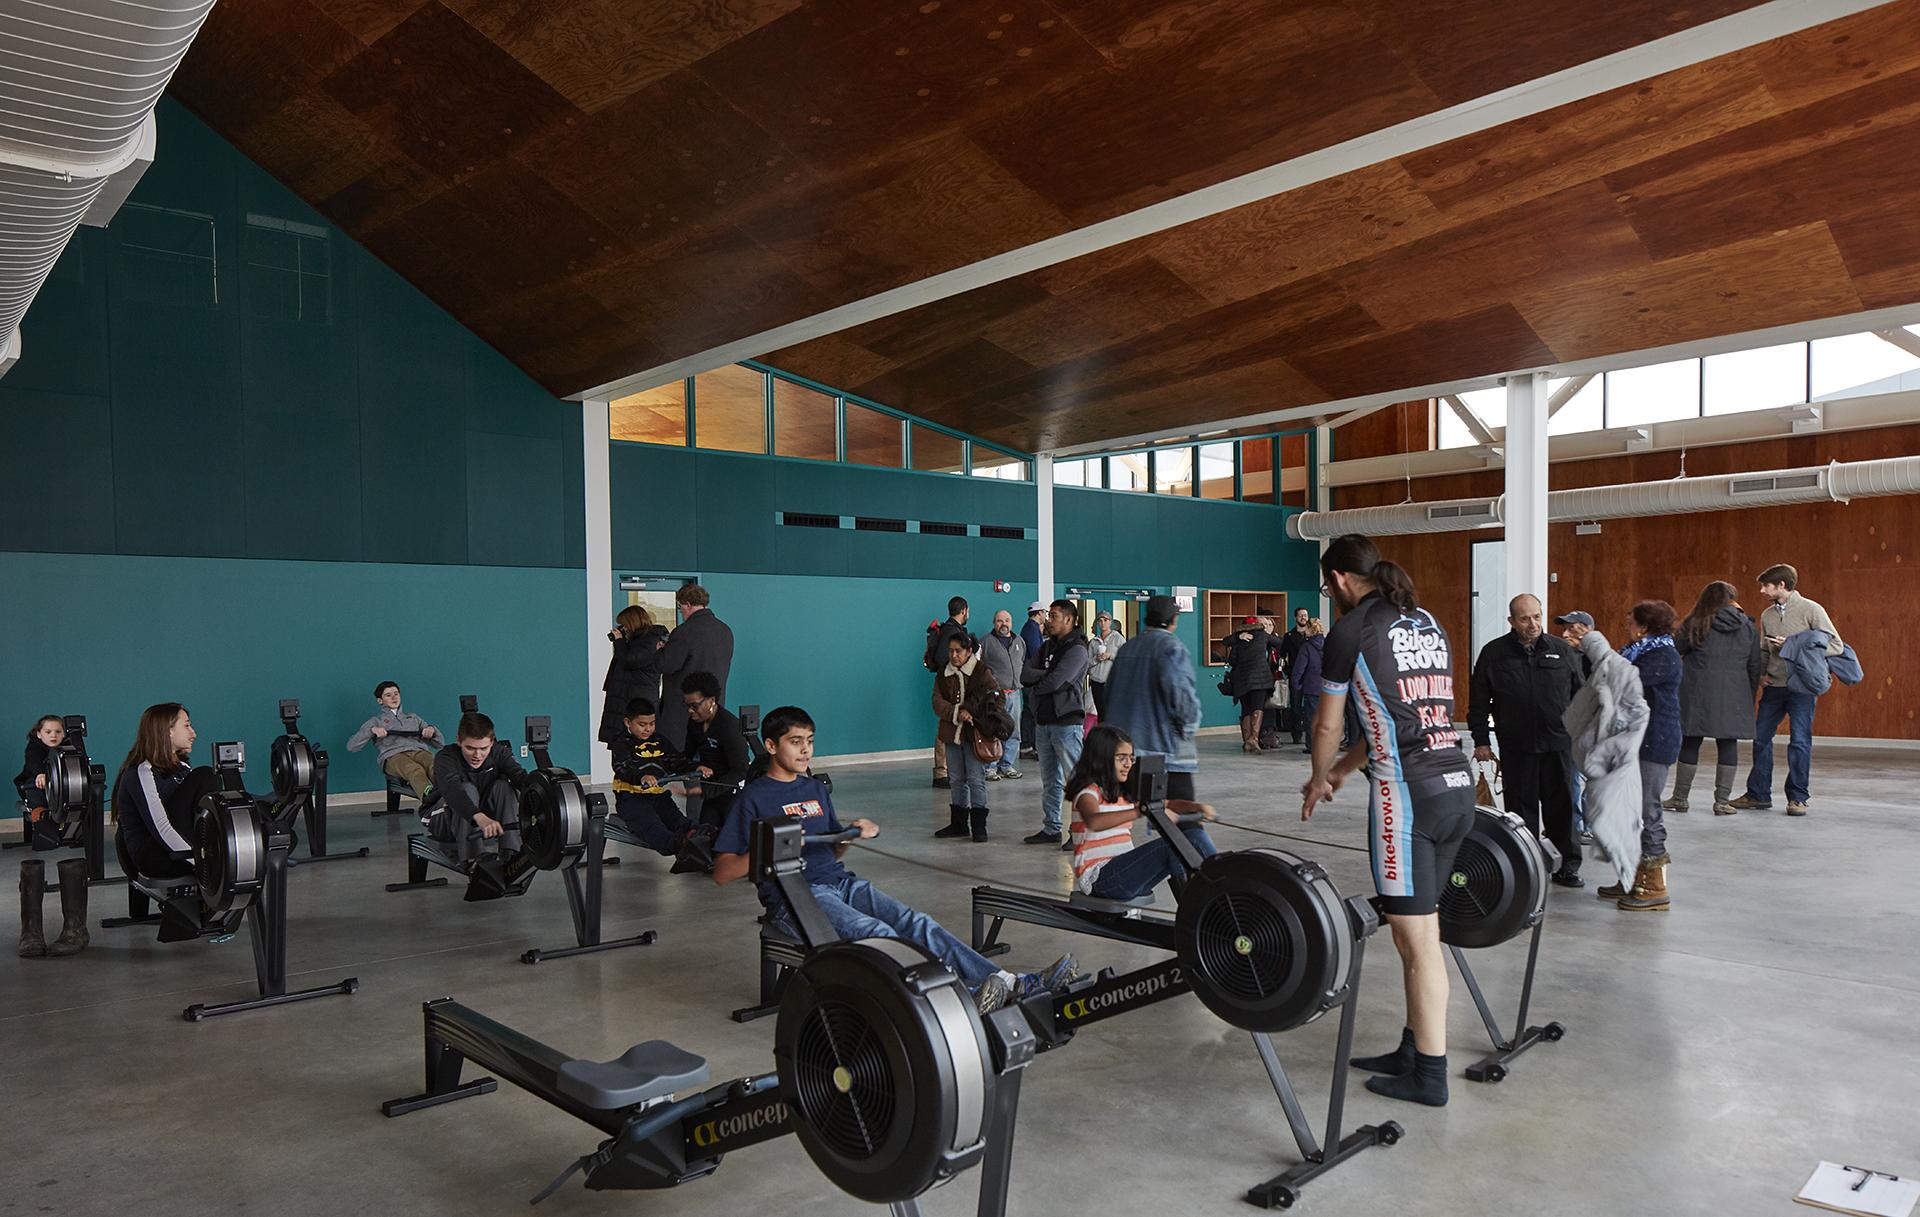 The new boathouse features a 5,800-square-foot heated training facility for rowers. (Tom Harris Photography / Studio Gang)